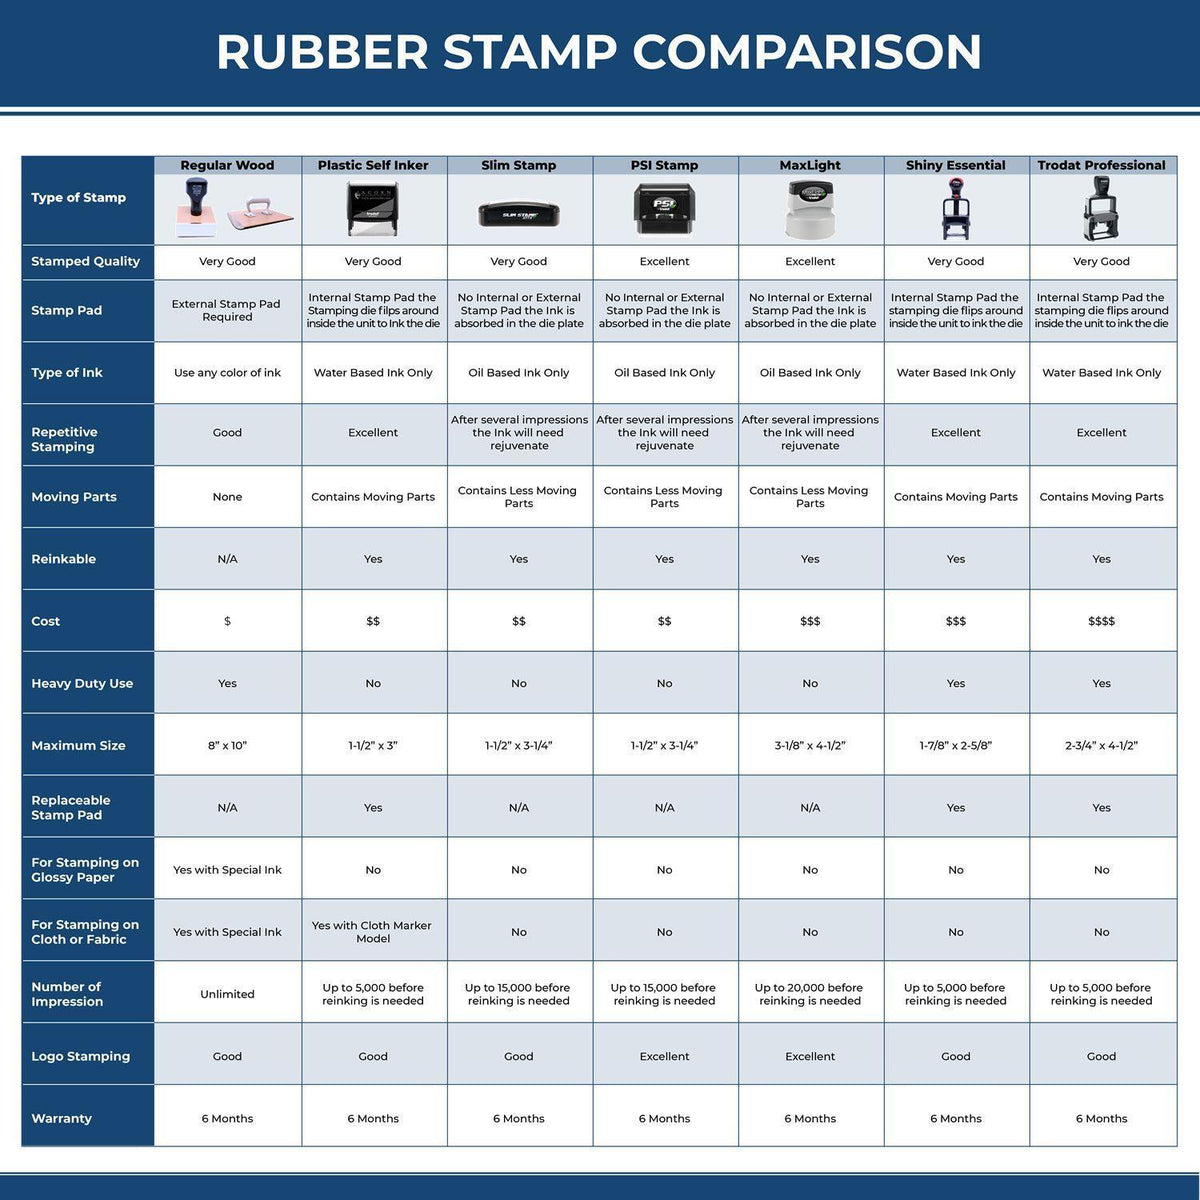 Large Approved For Payment Rubber Stamp 4104R Rubber Stamp Comparison